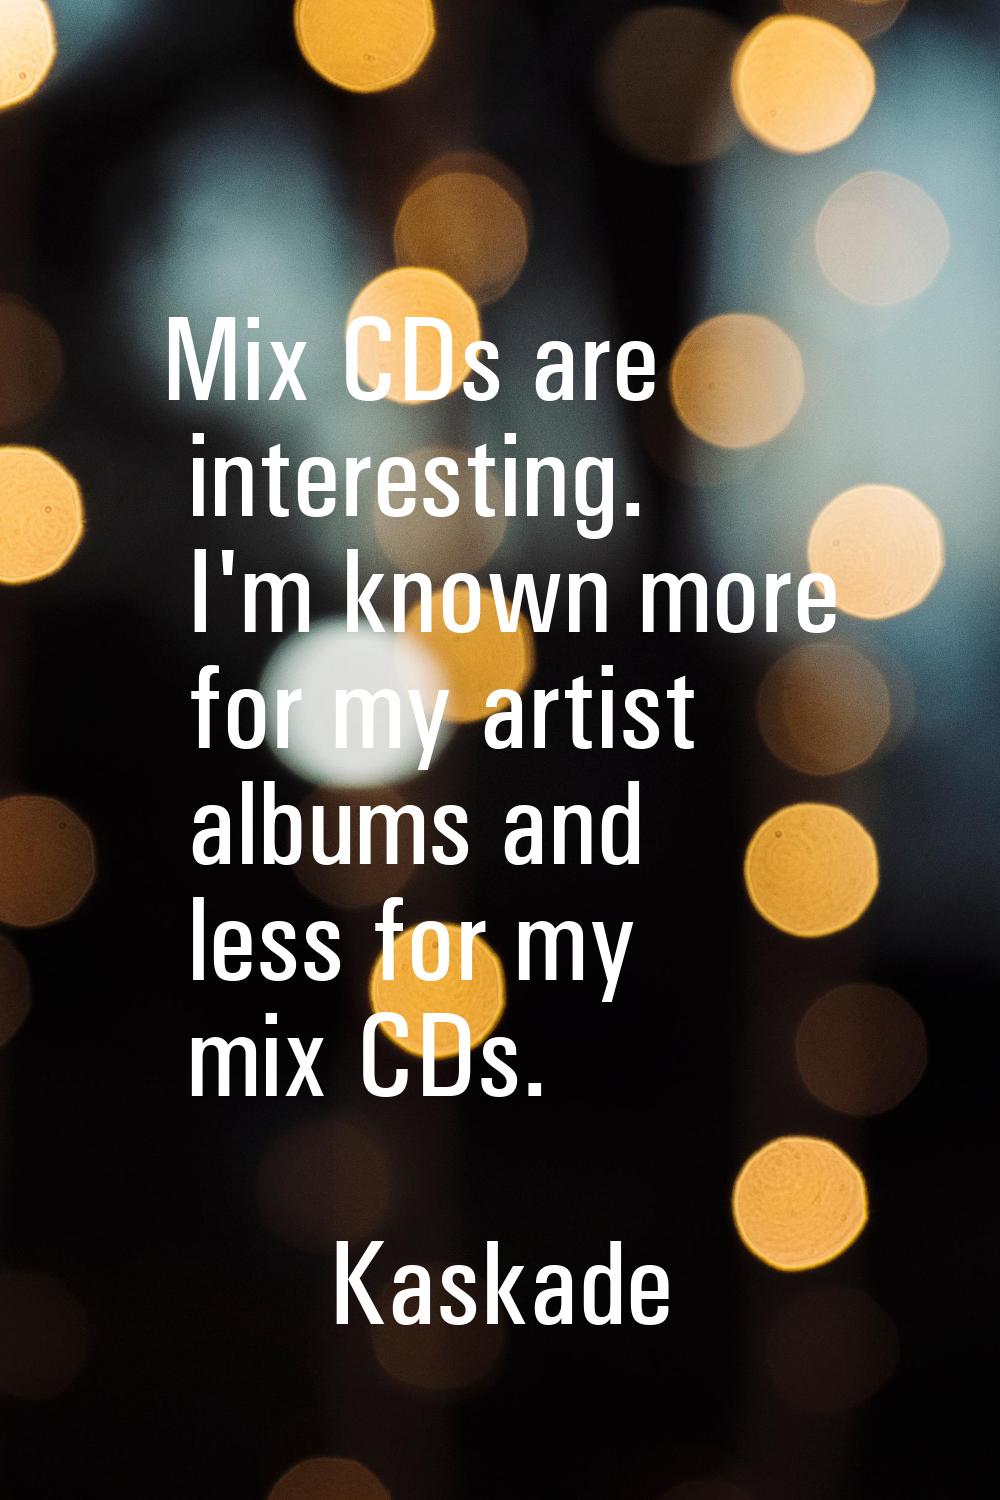 Mix CDs are interesting. I'm known more for my artist albums and less for my mix CDs.